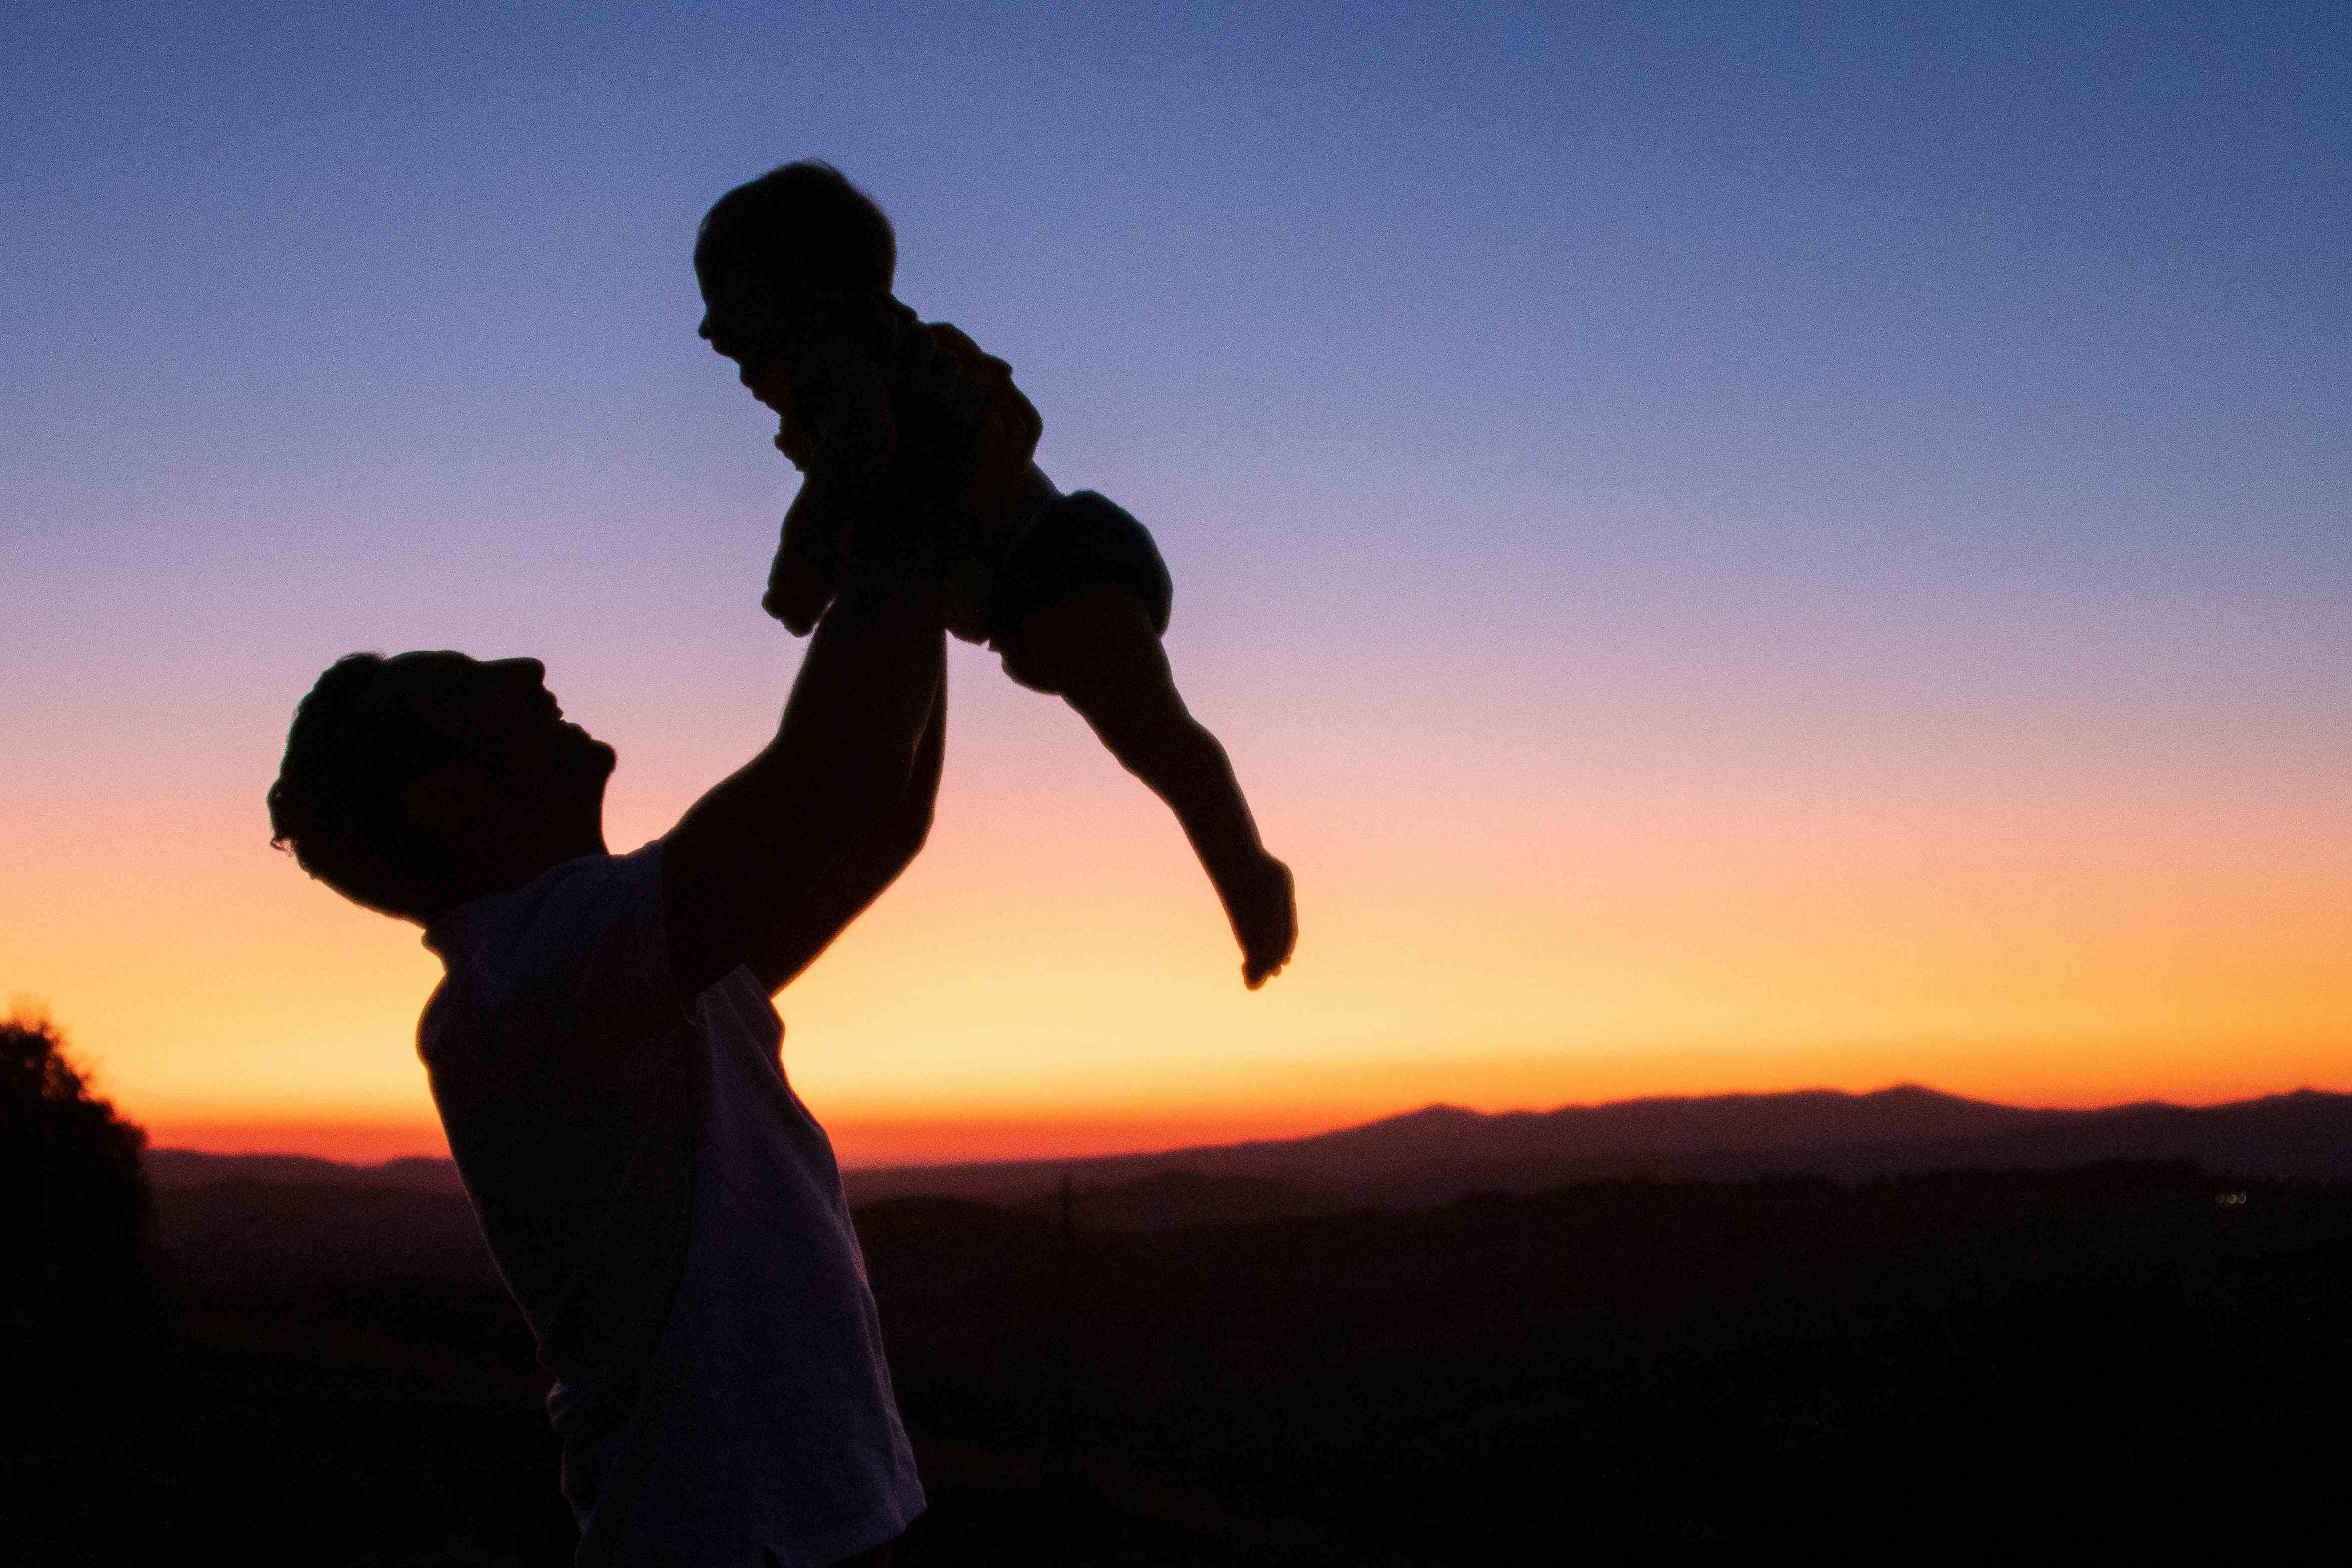 Silhouette of a father lifting young child. The background shows a sunset